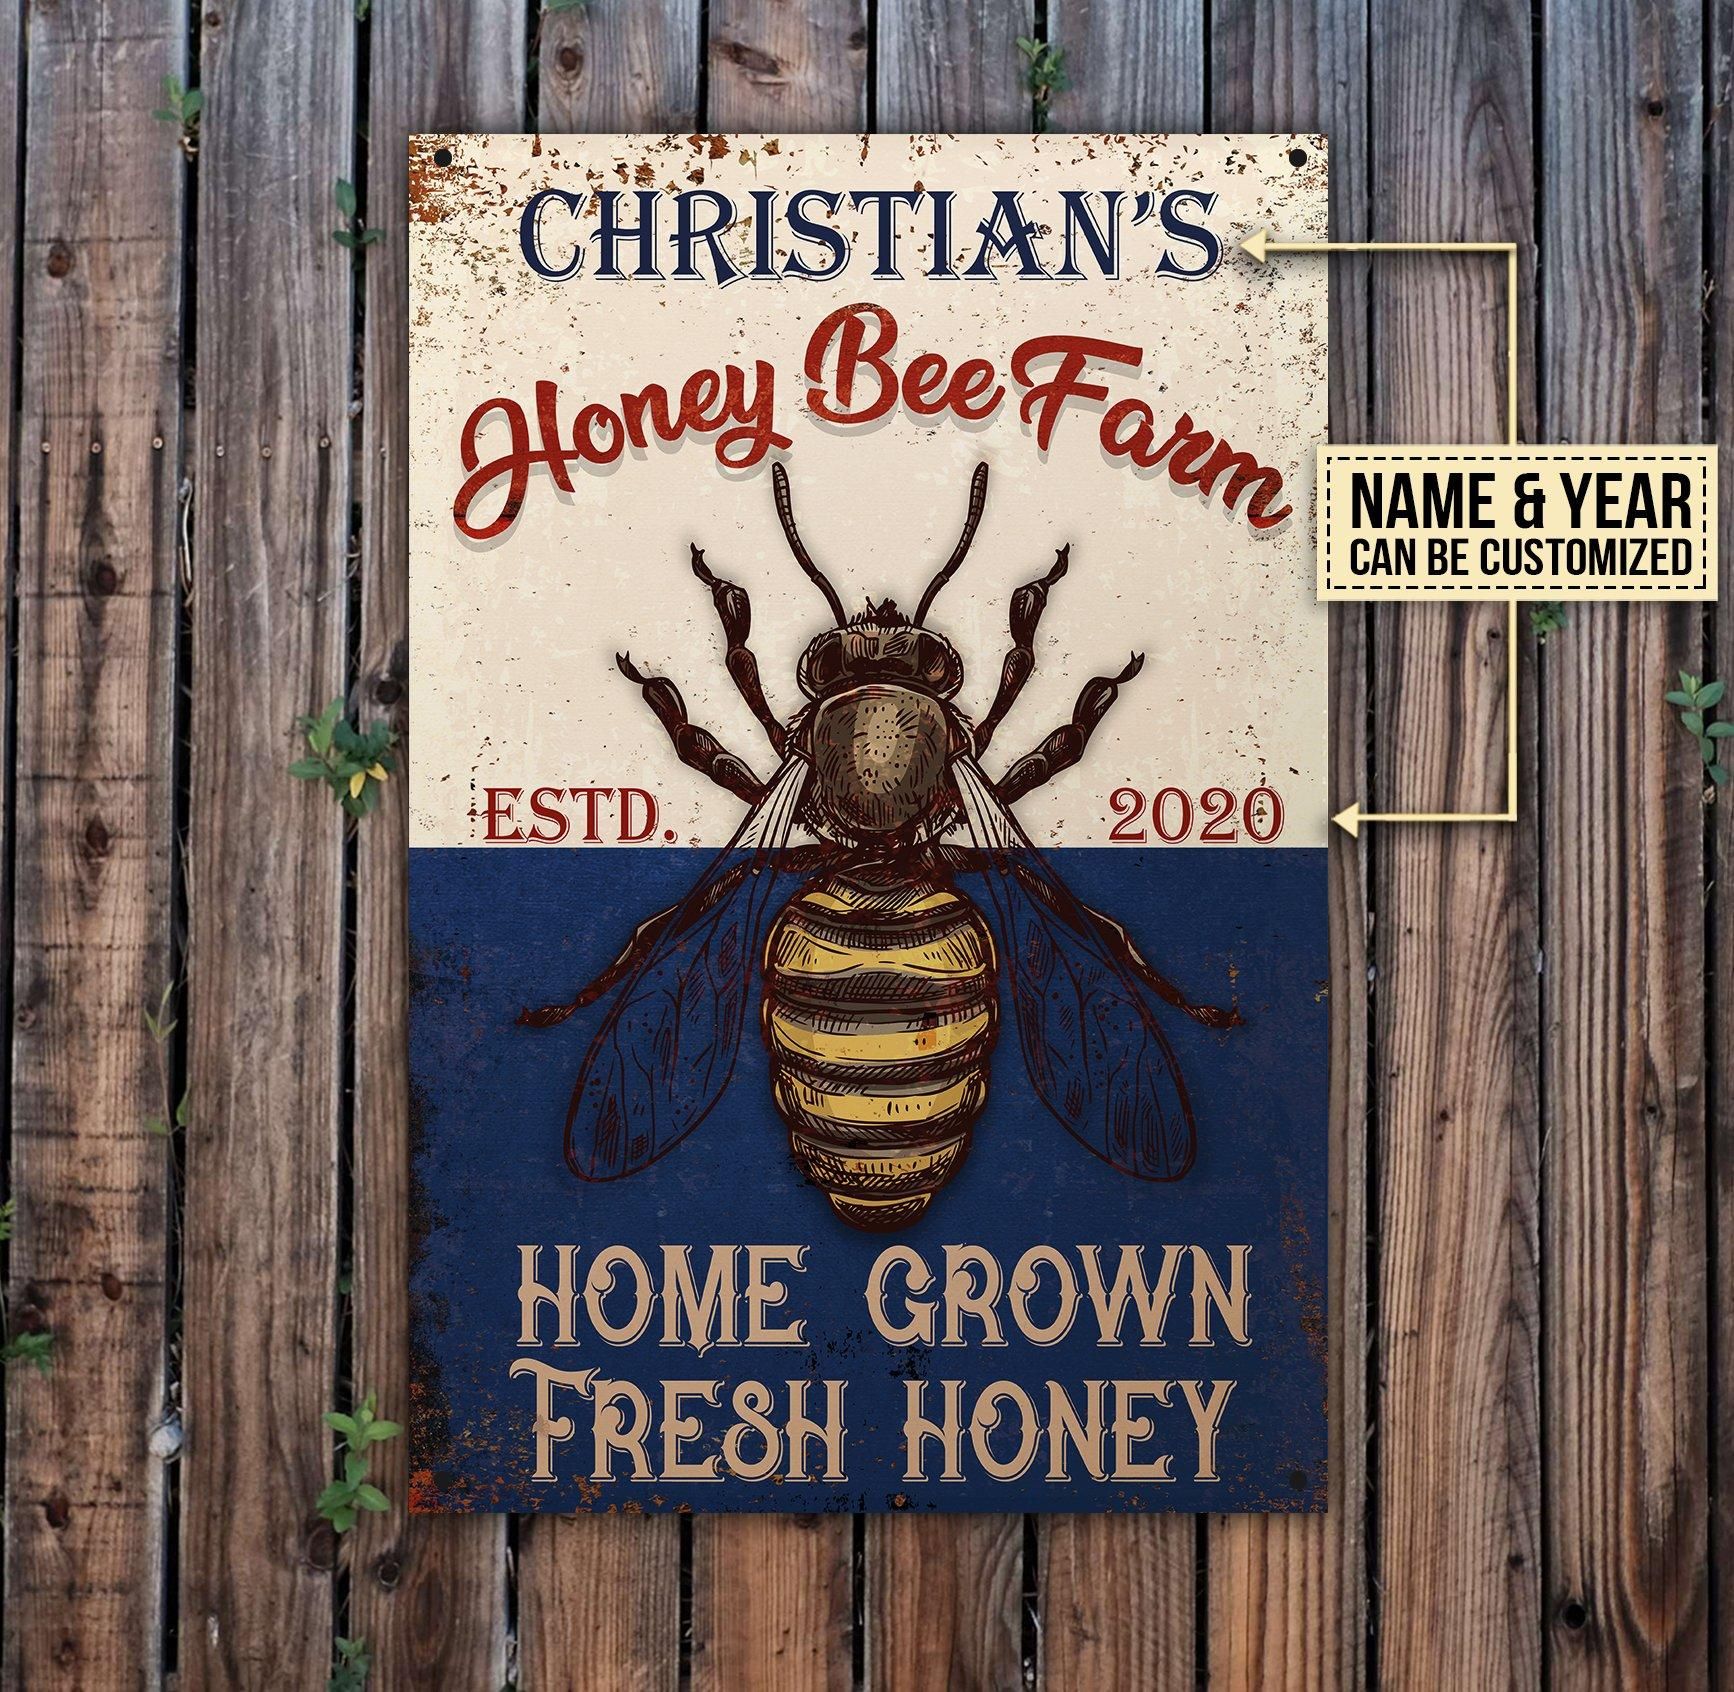 Personalized Honey Bee Farm Home Grown Fresh Honey Customized Classic Metal Signs